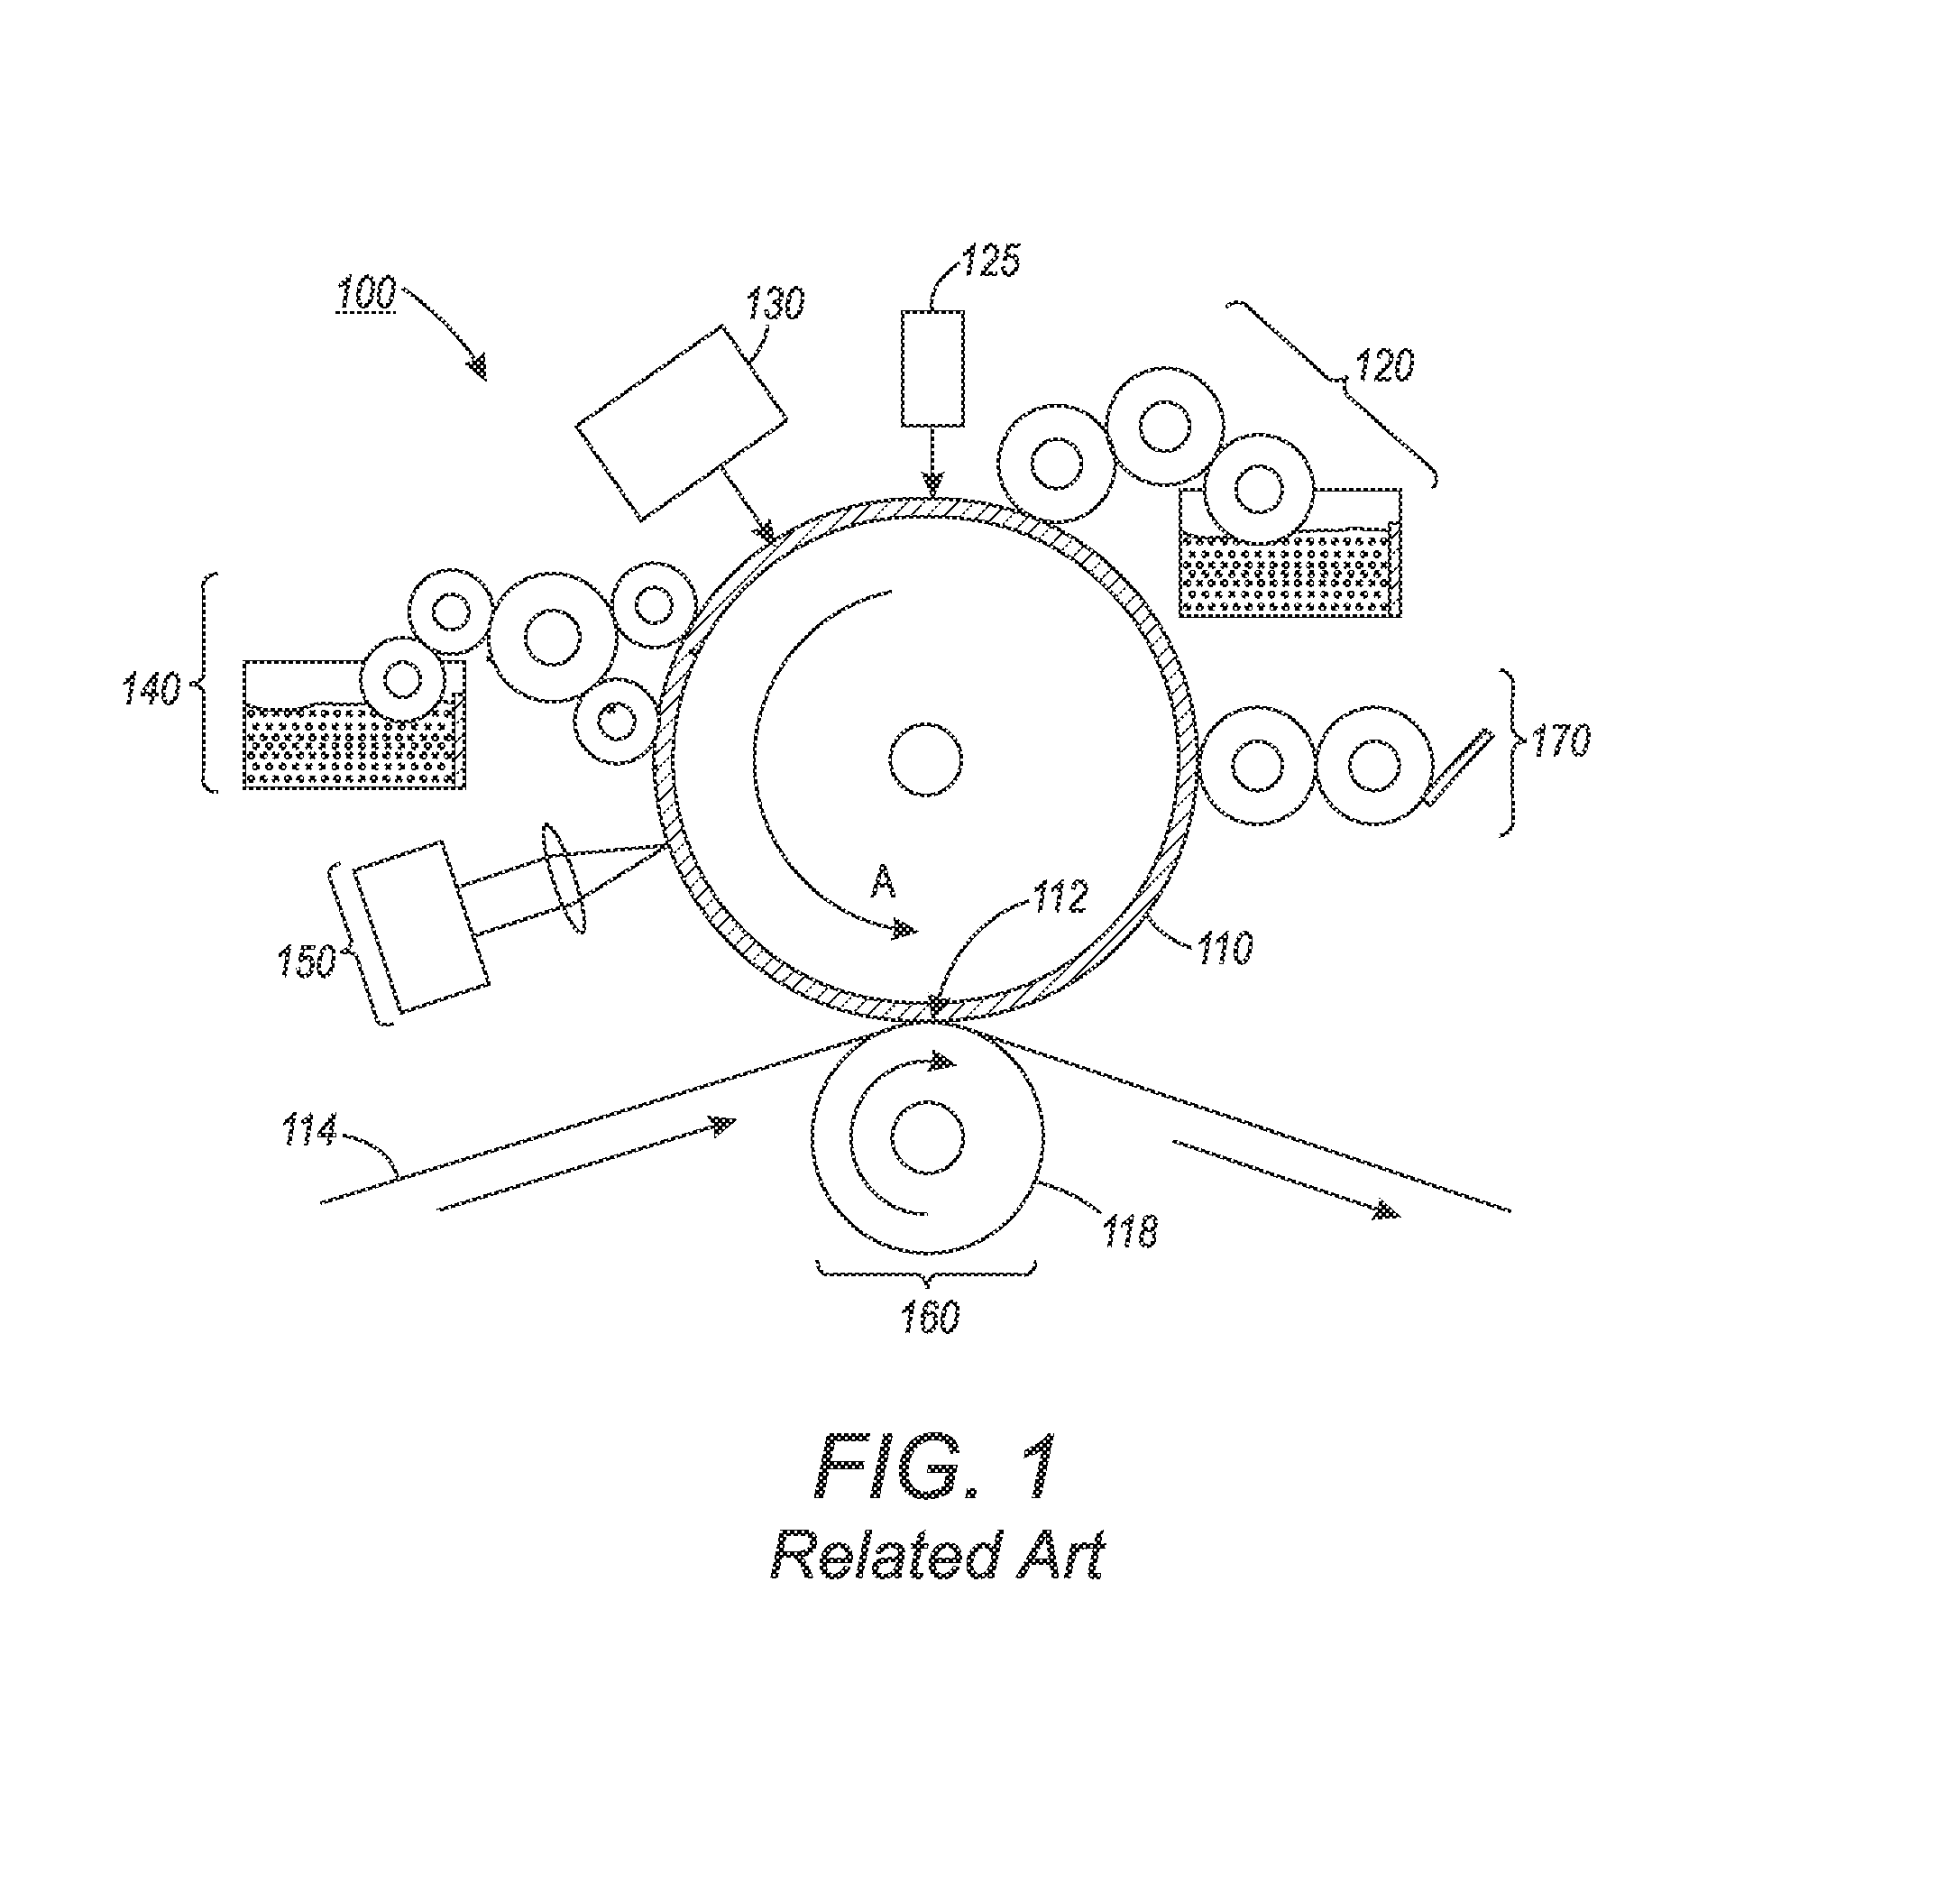 Systems and methods for implementing digital vapor phase patterning using variable data digital lithographic printing techniques